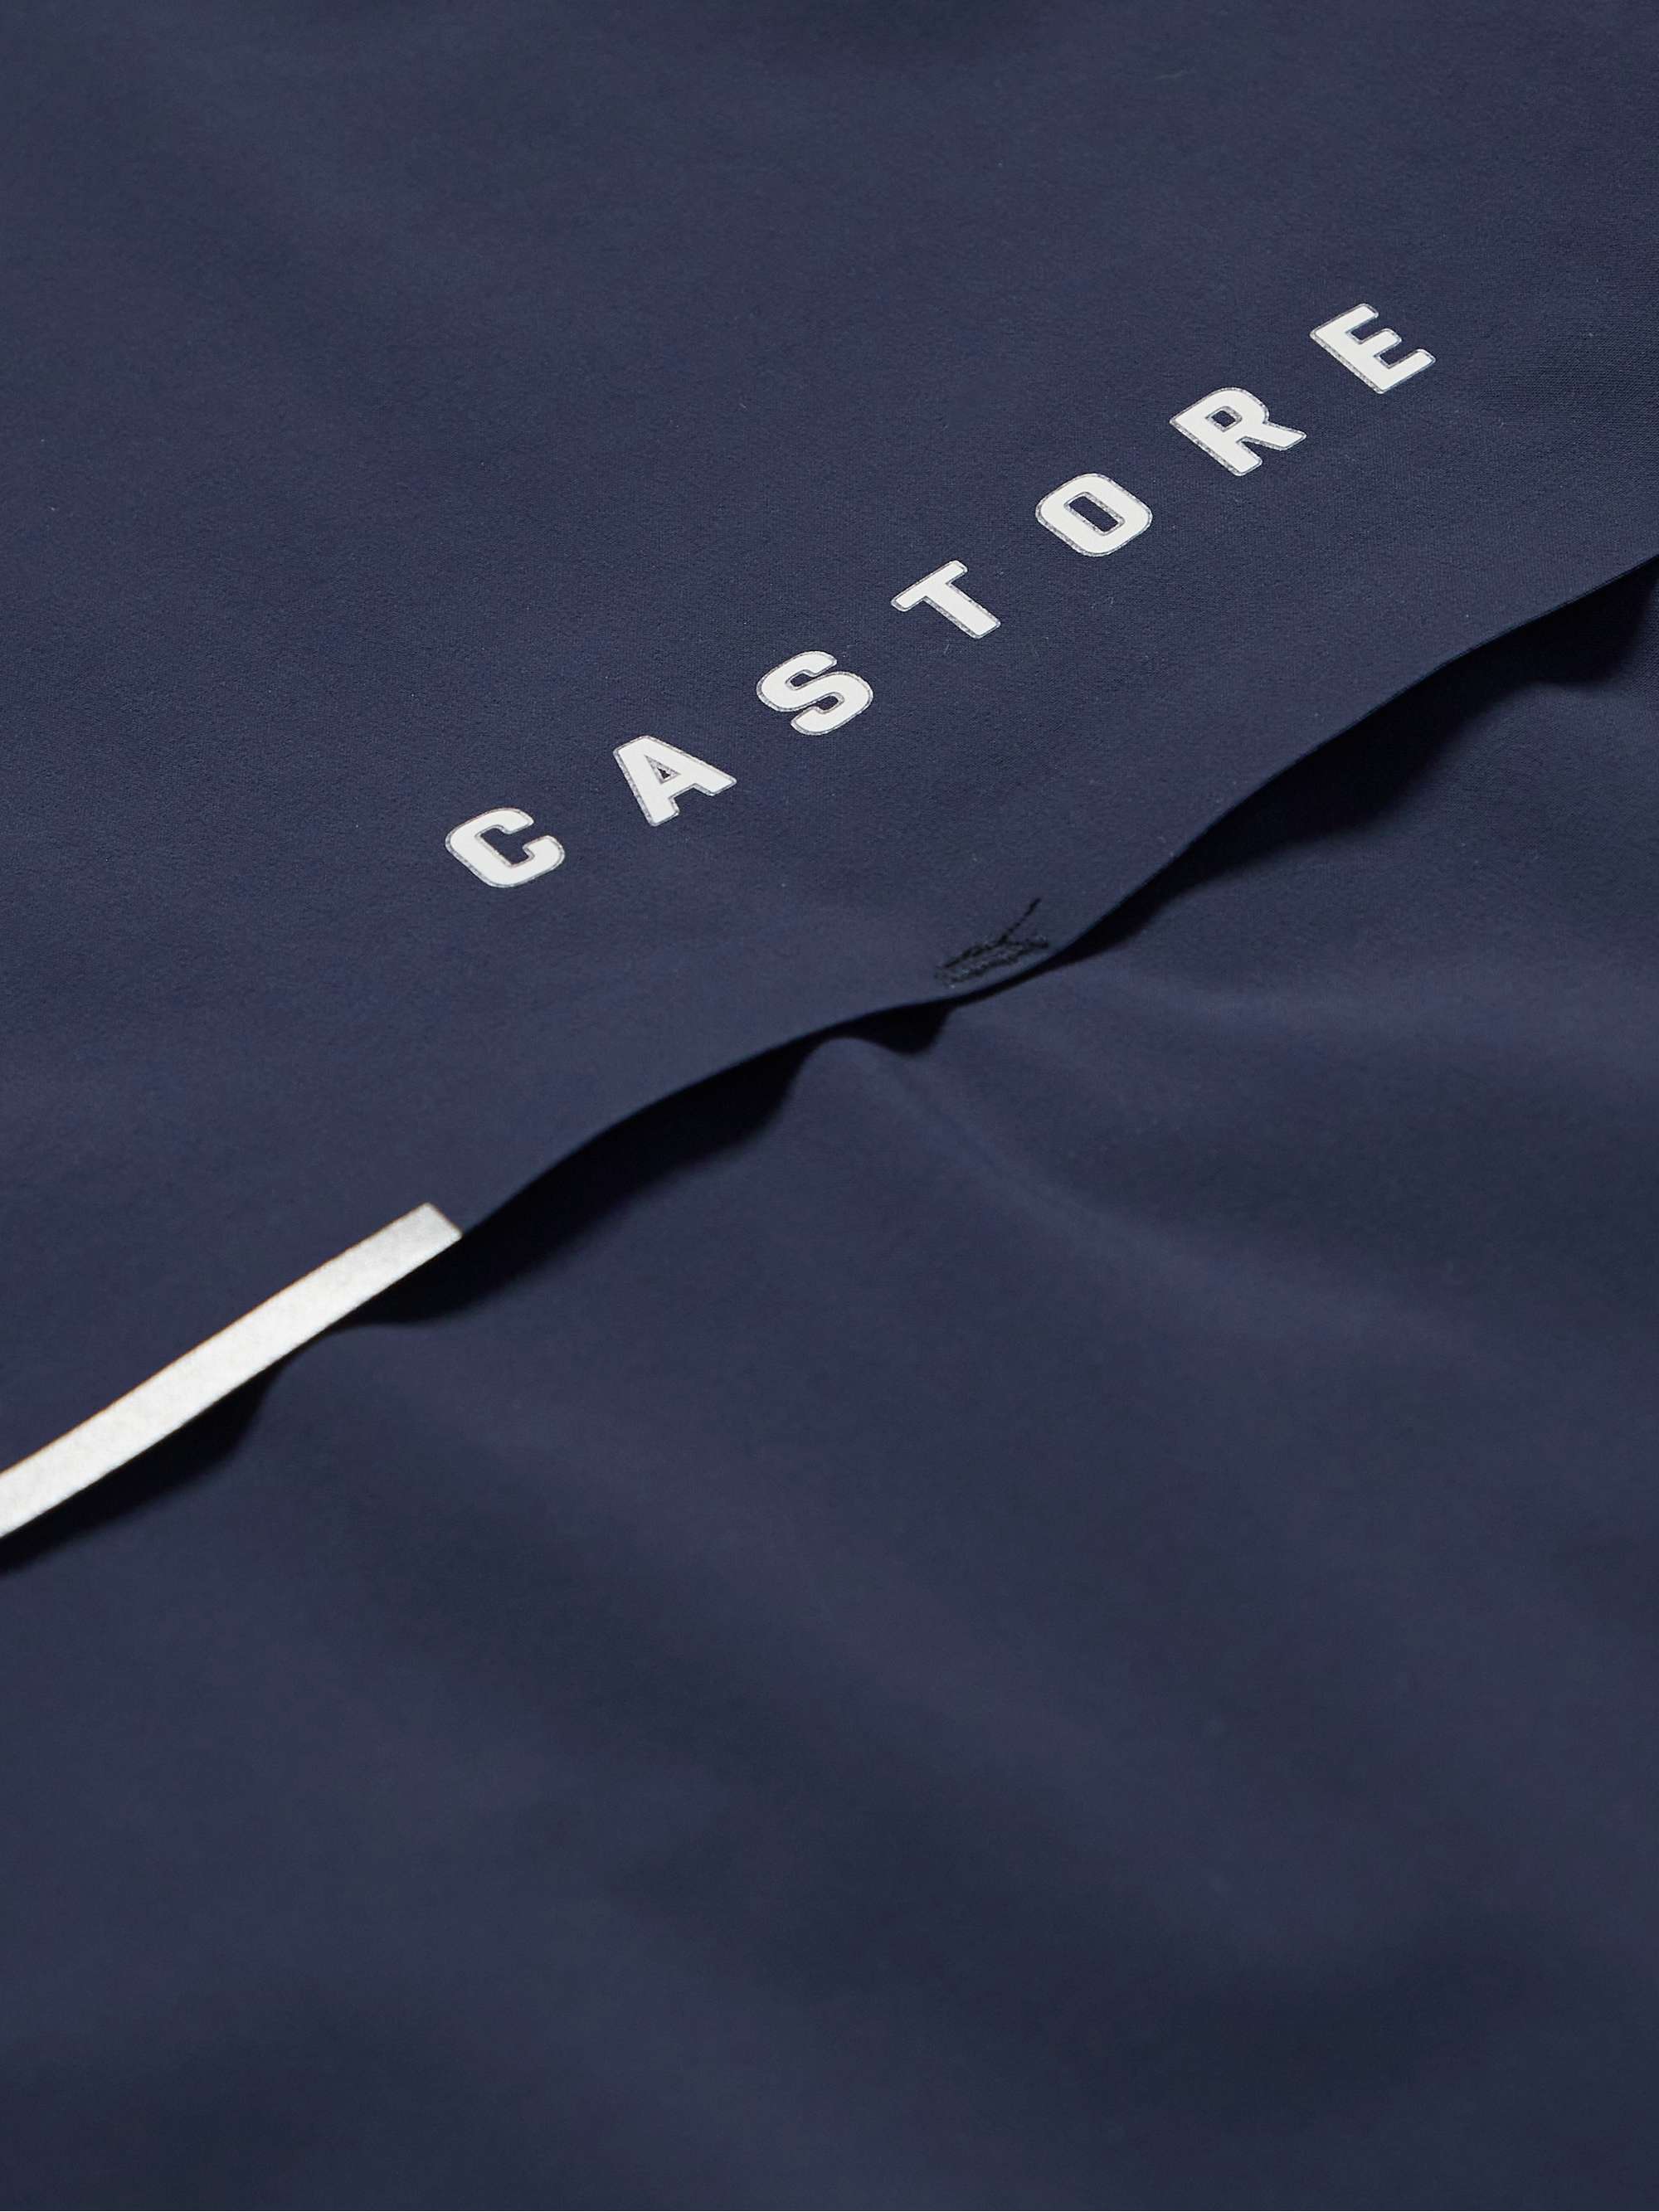 CASTORE Active Logo-Print Two-Tone Stretch-Shell Jacket